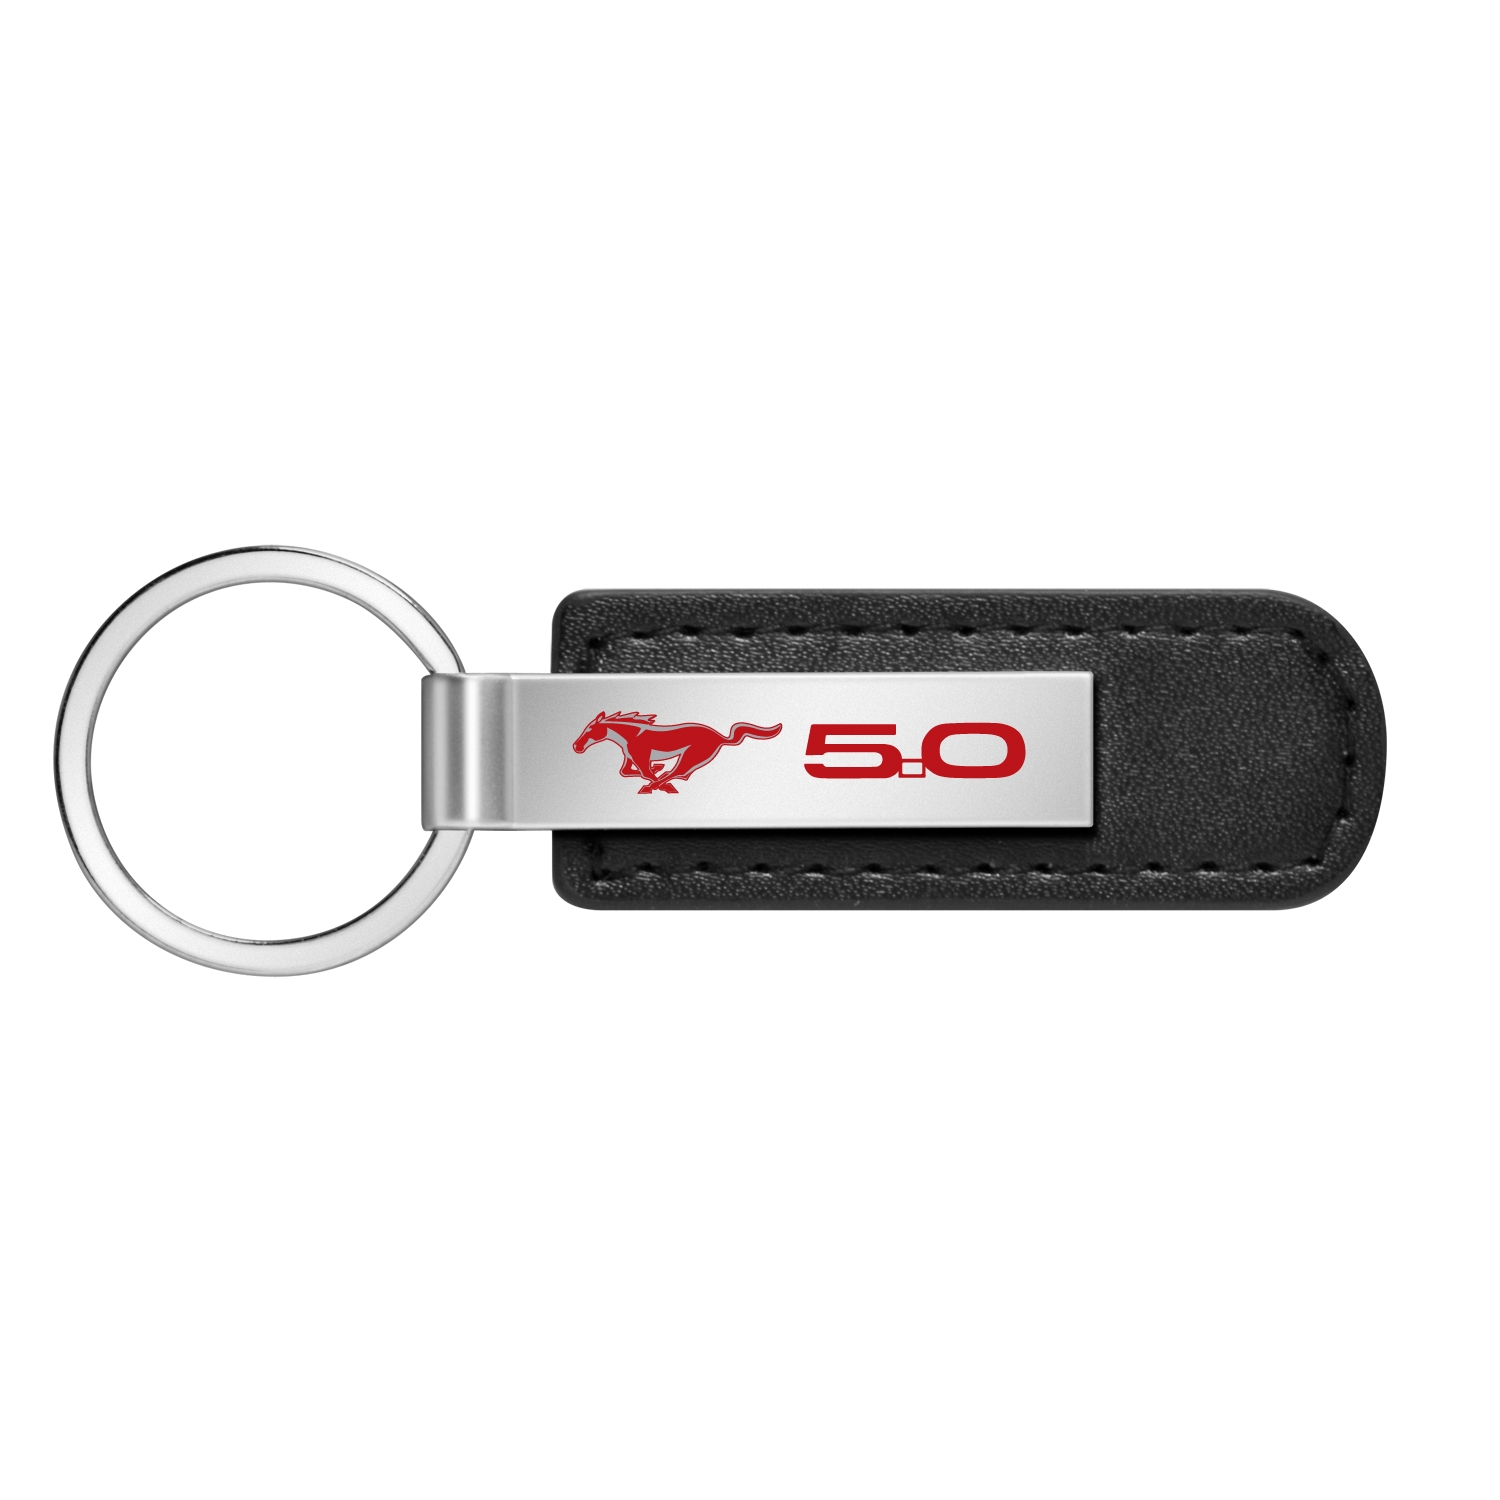 Ford Mustang GT 5.0 in Red Black Leather Strap Key Chain